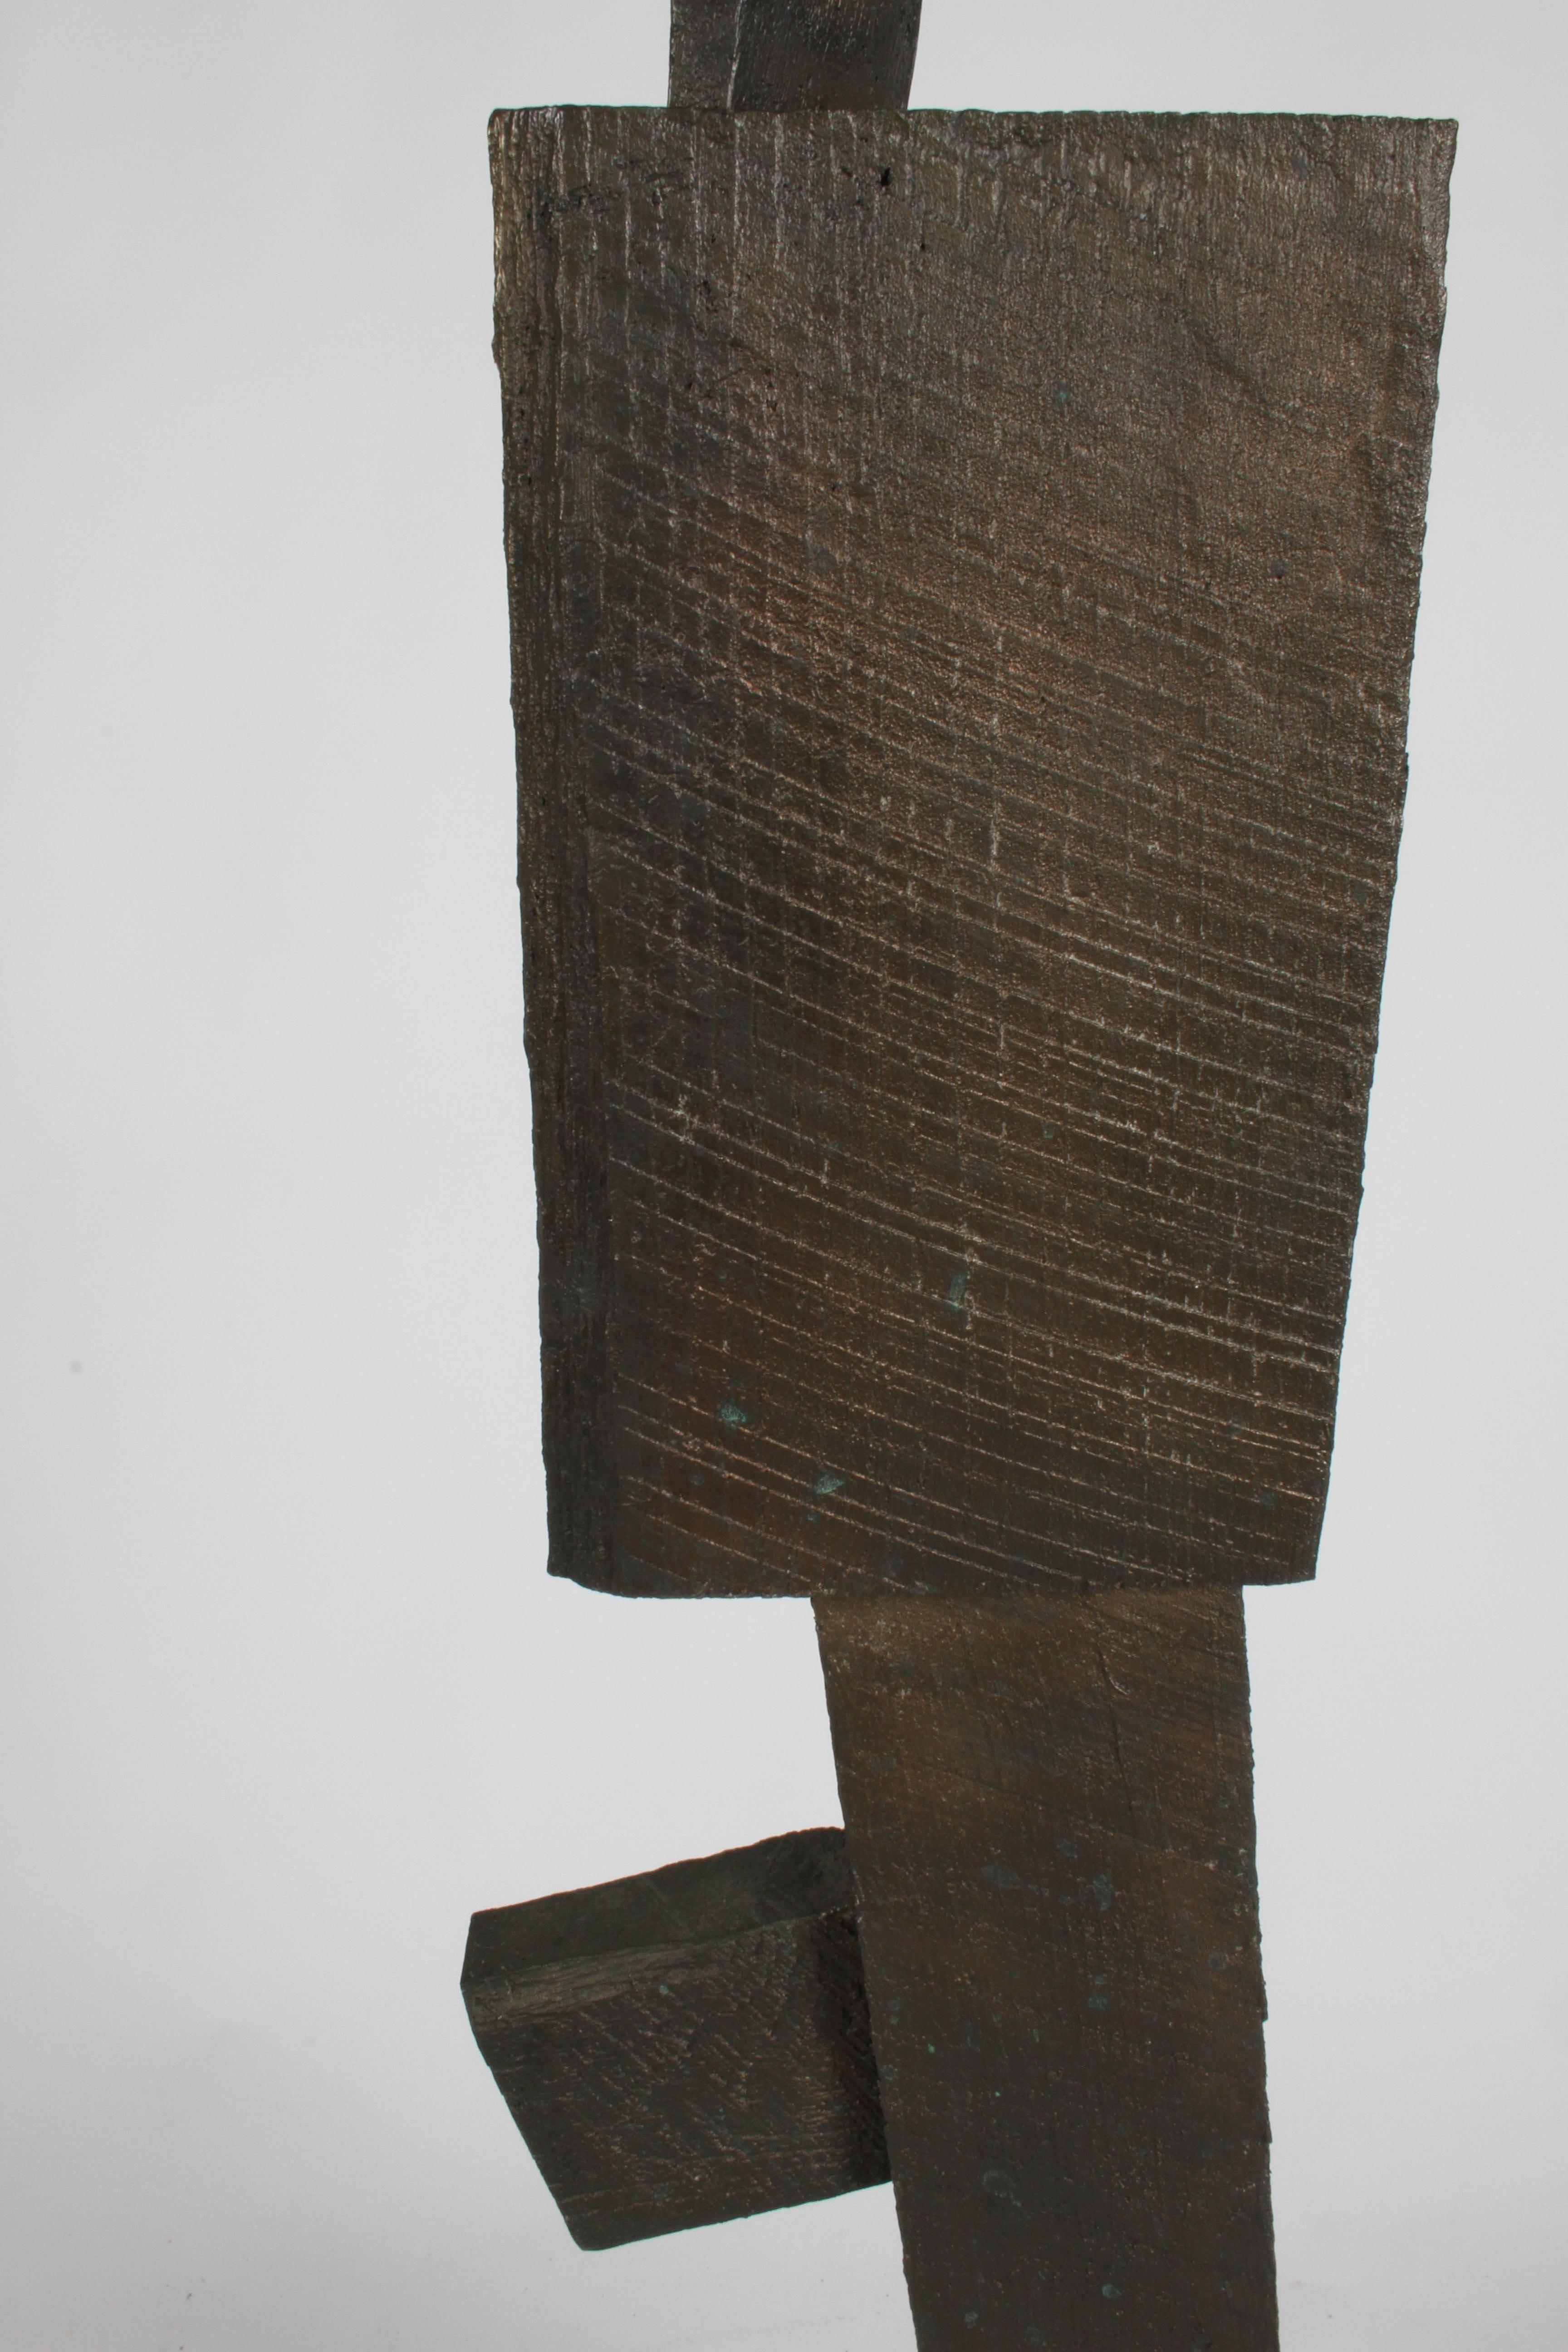 Mid-20th Century Mid-Century Modern Bronze with Wood Texture Brutalist Style TOTEM Form Sculpture For Sale